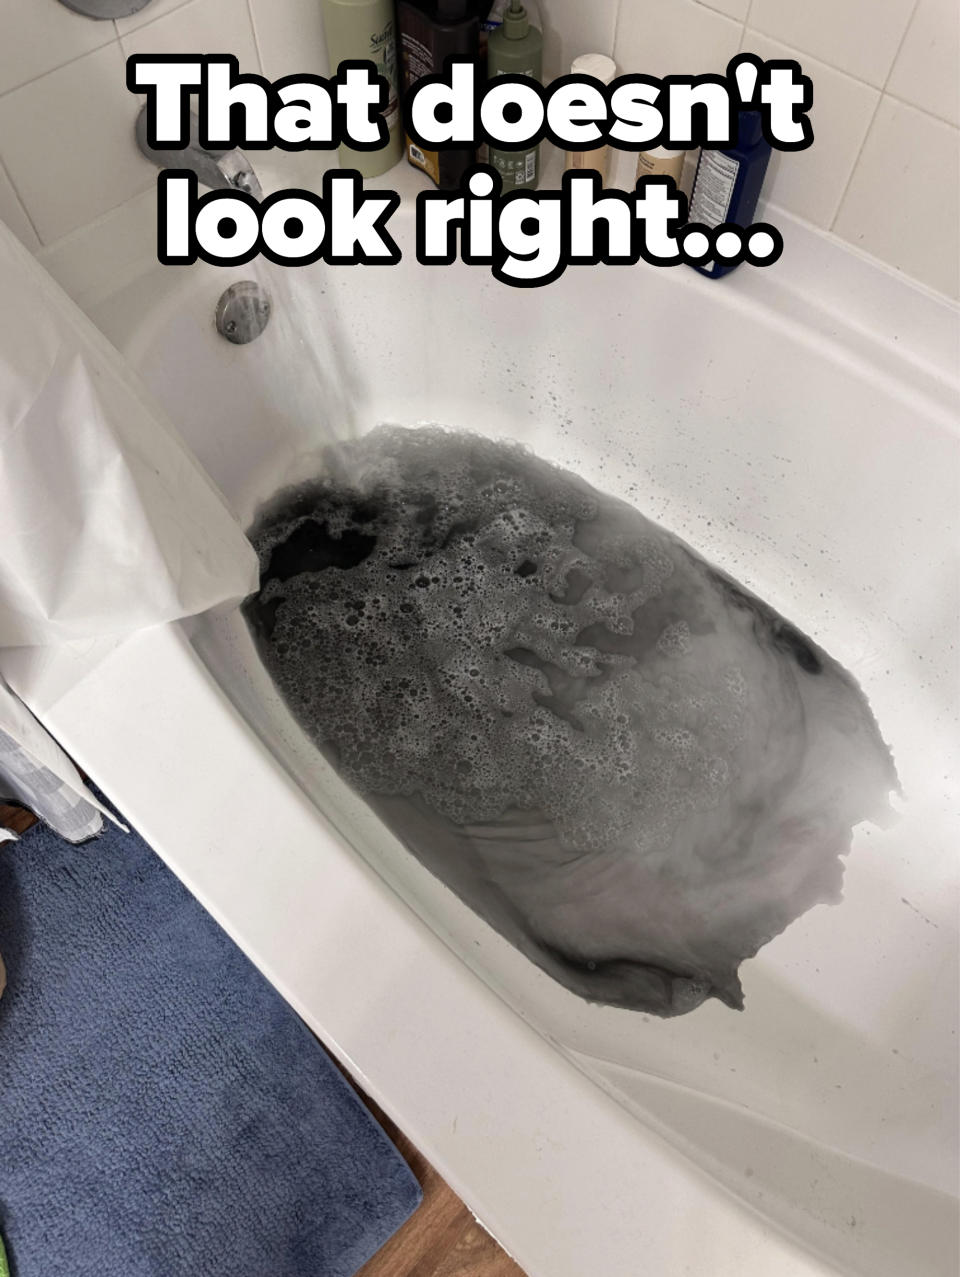 "That doesn't look right": A bathtub with black water